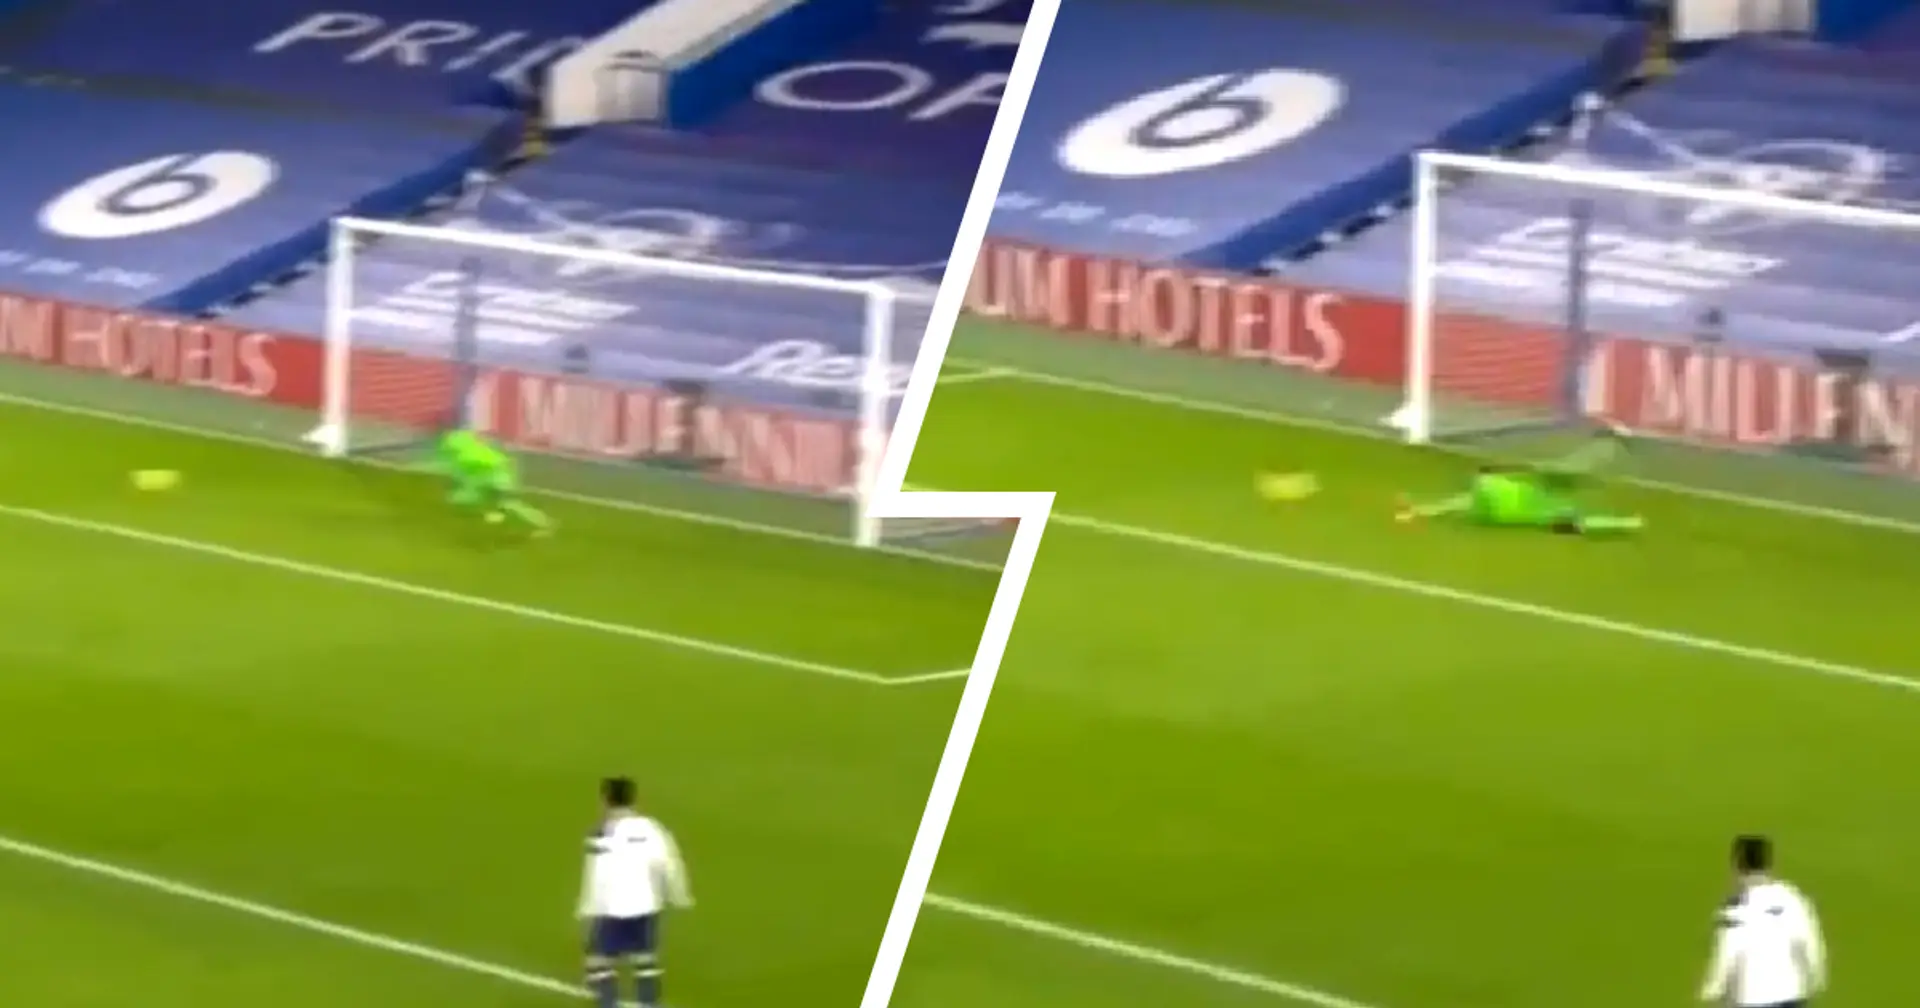 Edouard Mendy makes an excellent save to stop Chelsea from conceding